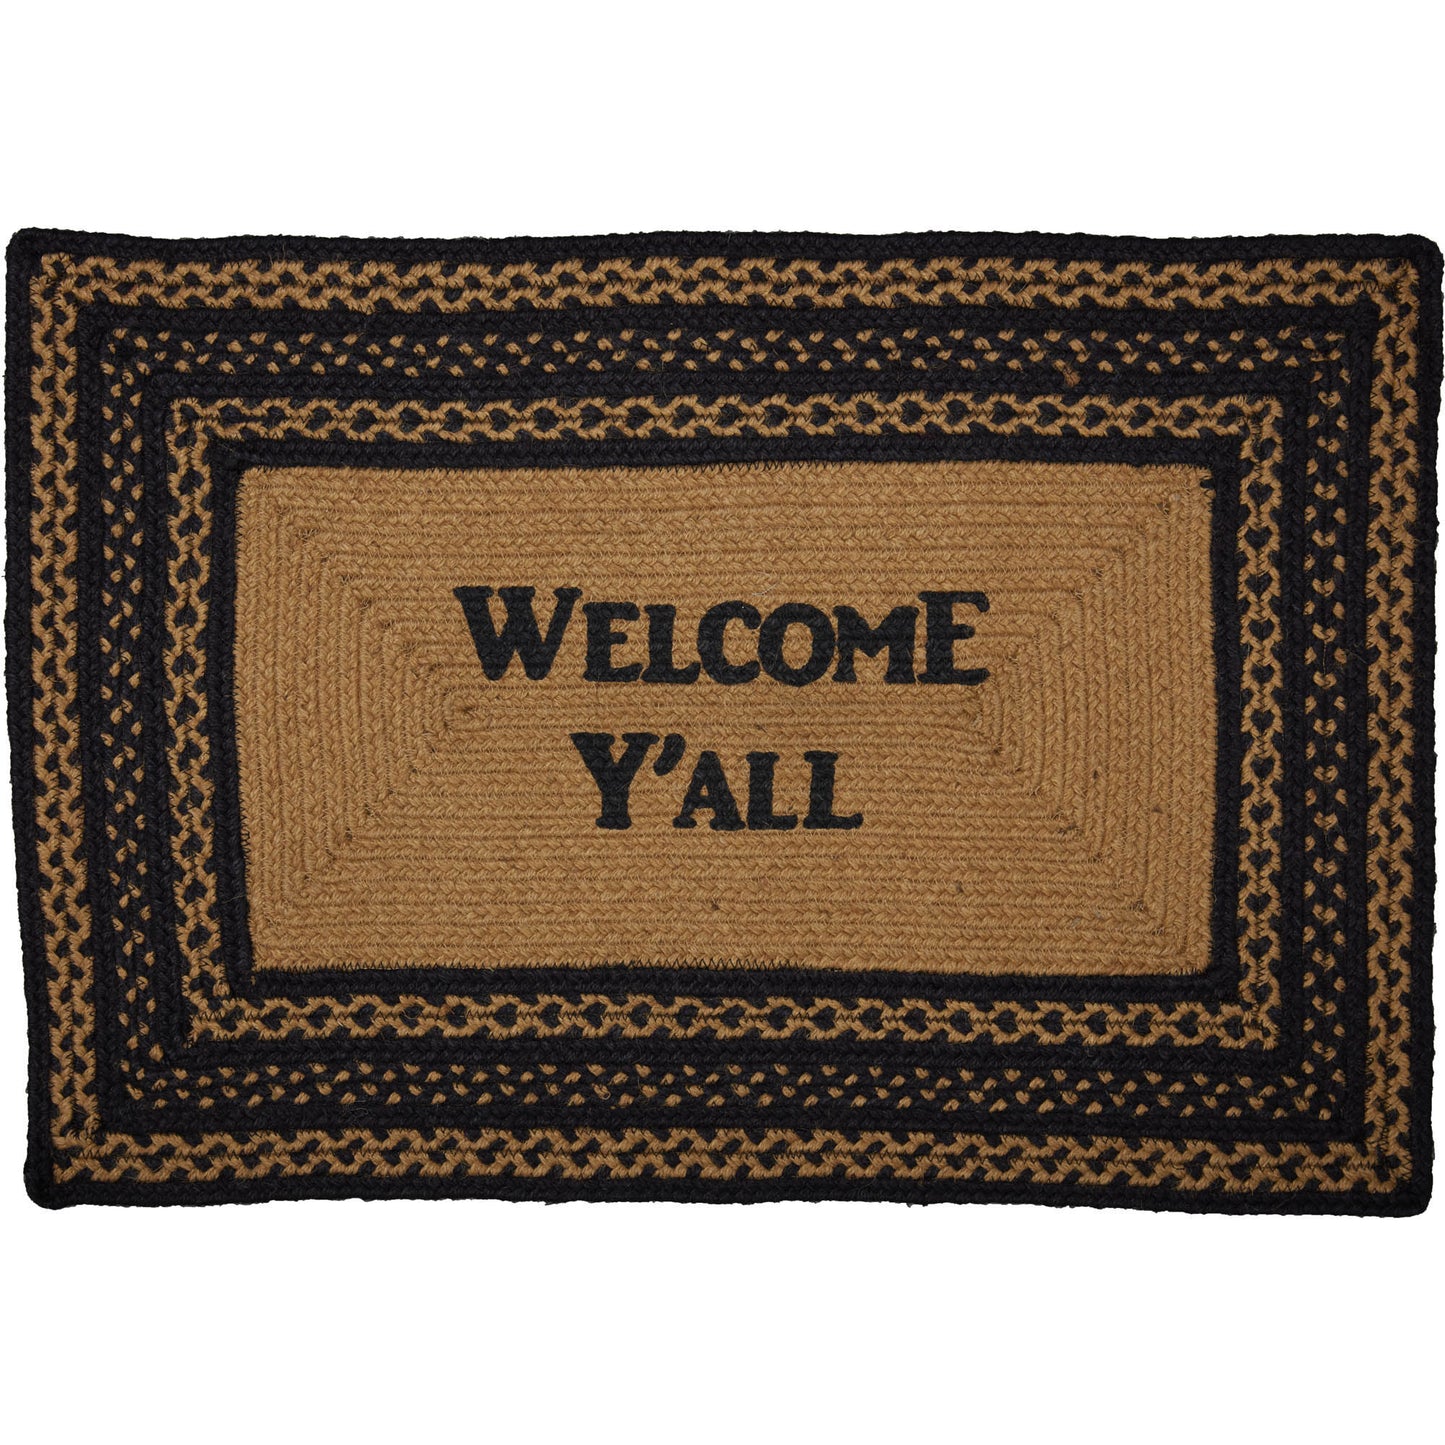 69436-Farmhouse-Jute-Rug-Rect-Stencil-Welcome-Y-all-w-Pad-20x30-image-6